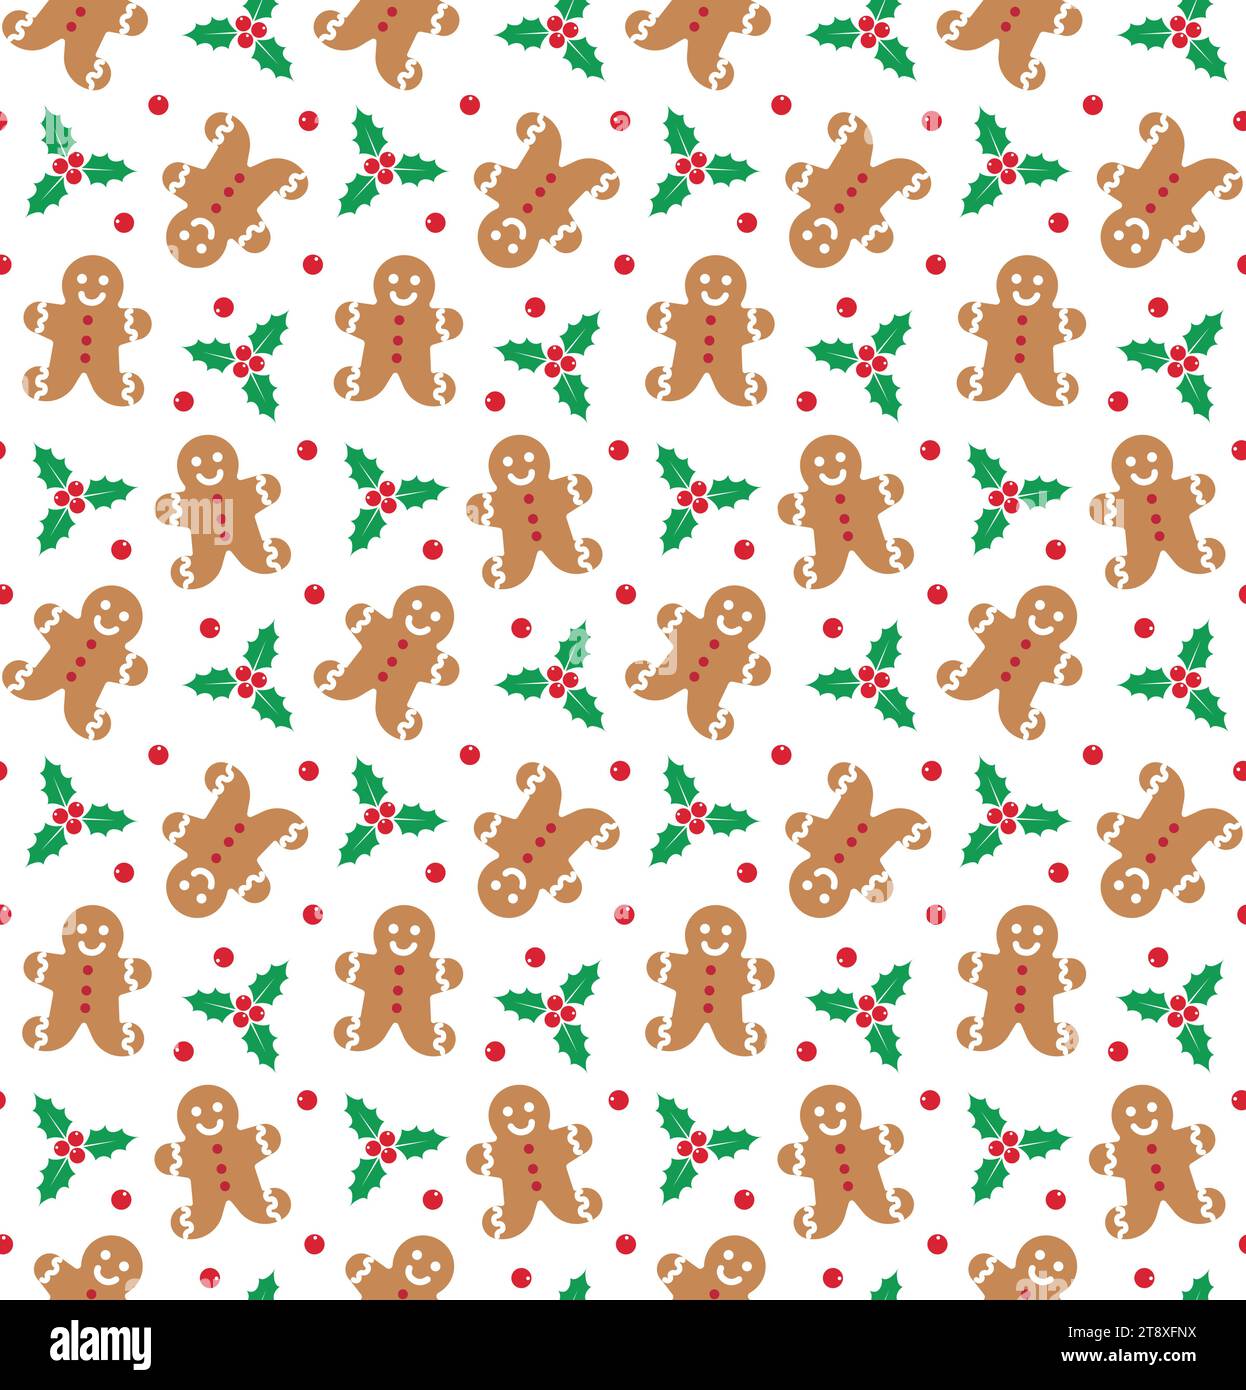 Gingerbread Man Christmas Wrapping Paper Seamless Pattern Stock Photo,  Picture and Royalty Free Image. Image 66974701.